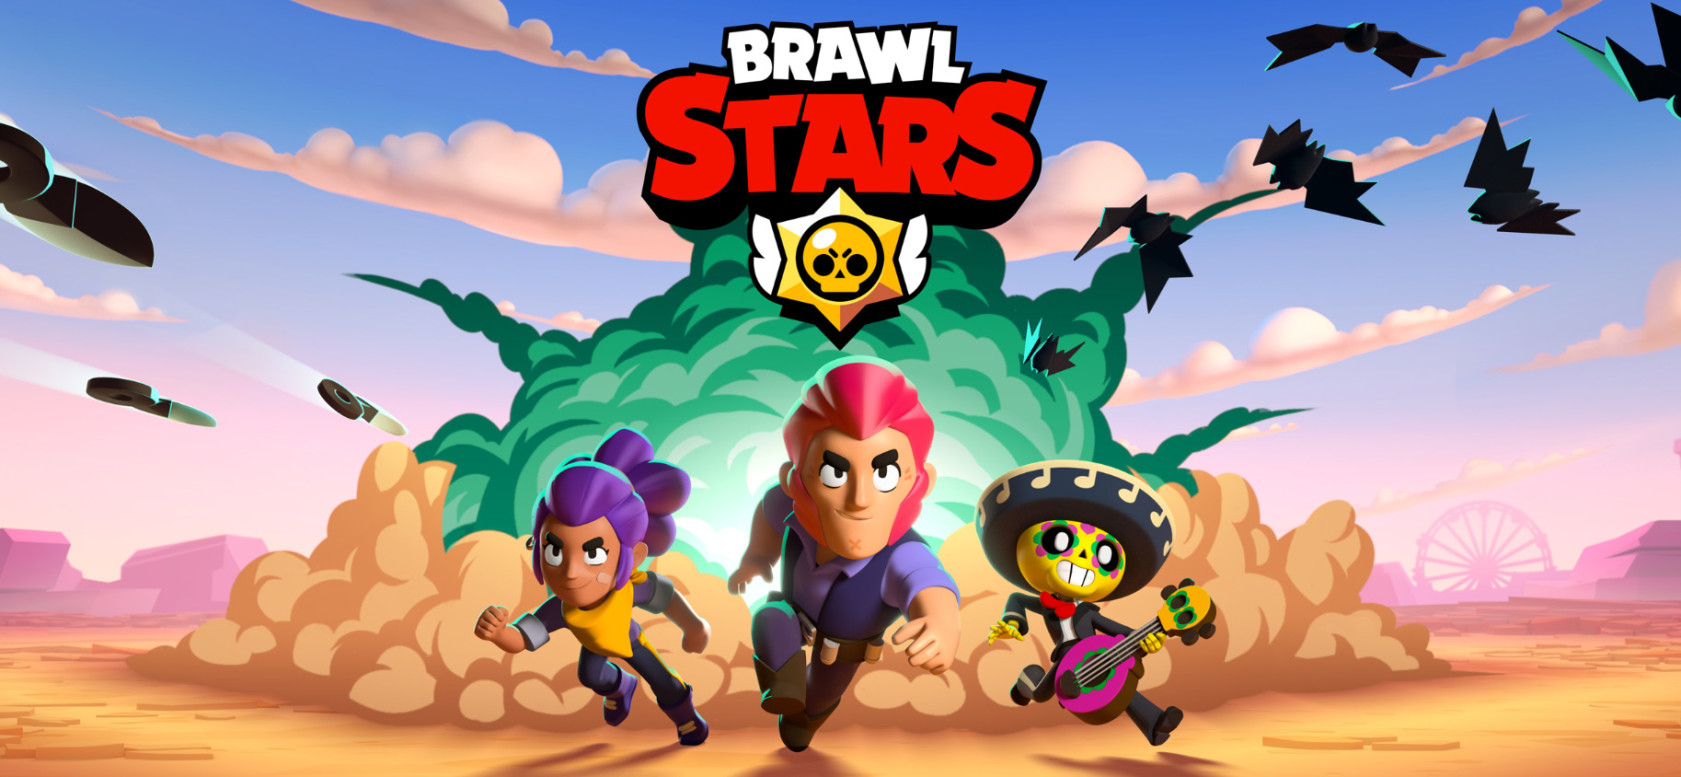 Waste Creative's Global Launch Campaign for Supercell's Brawl